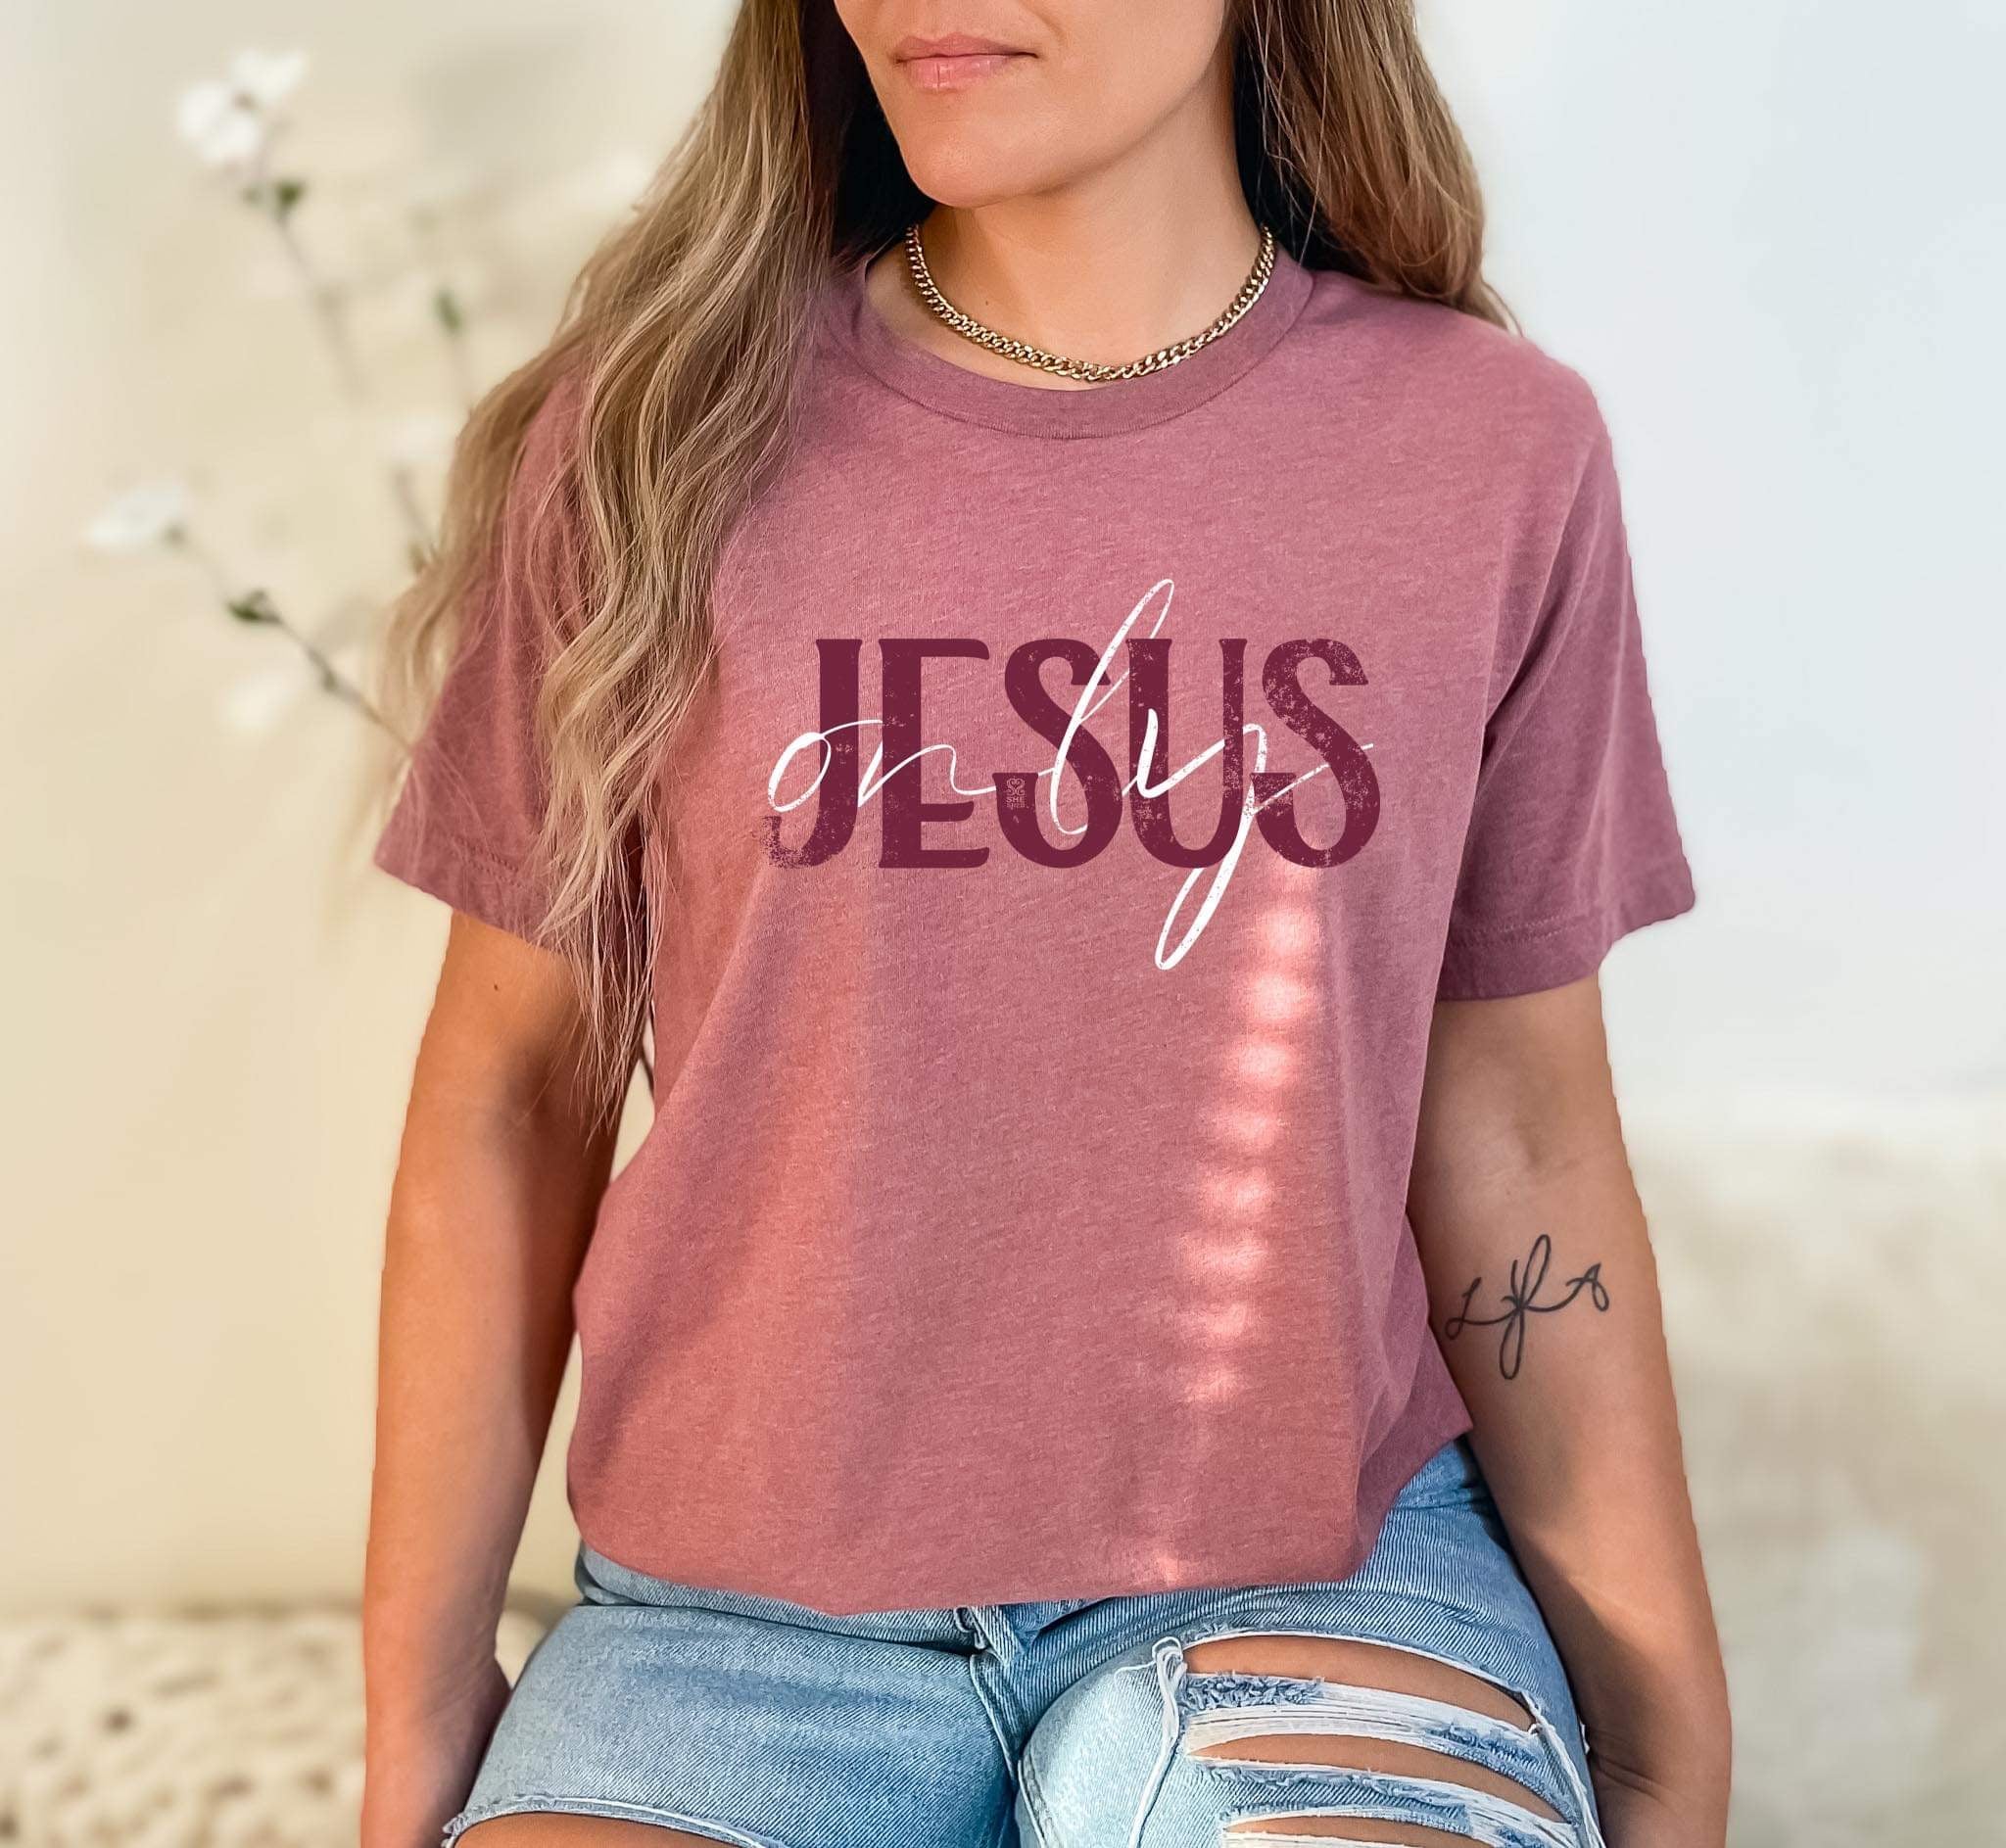 Only Jesus Graphic Tee